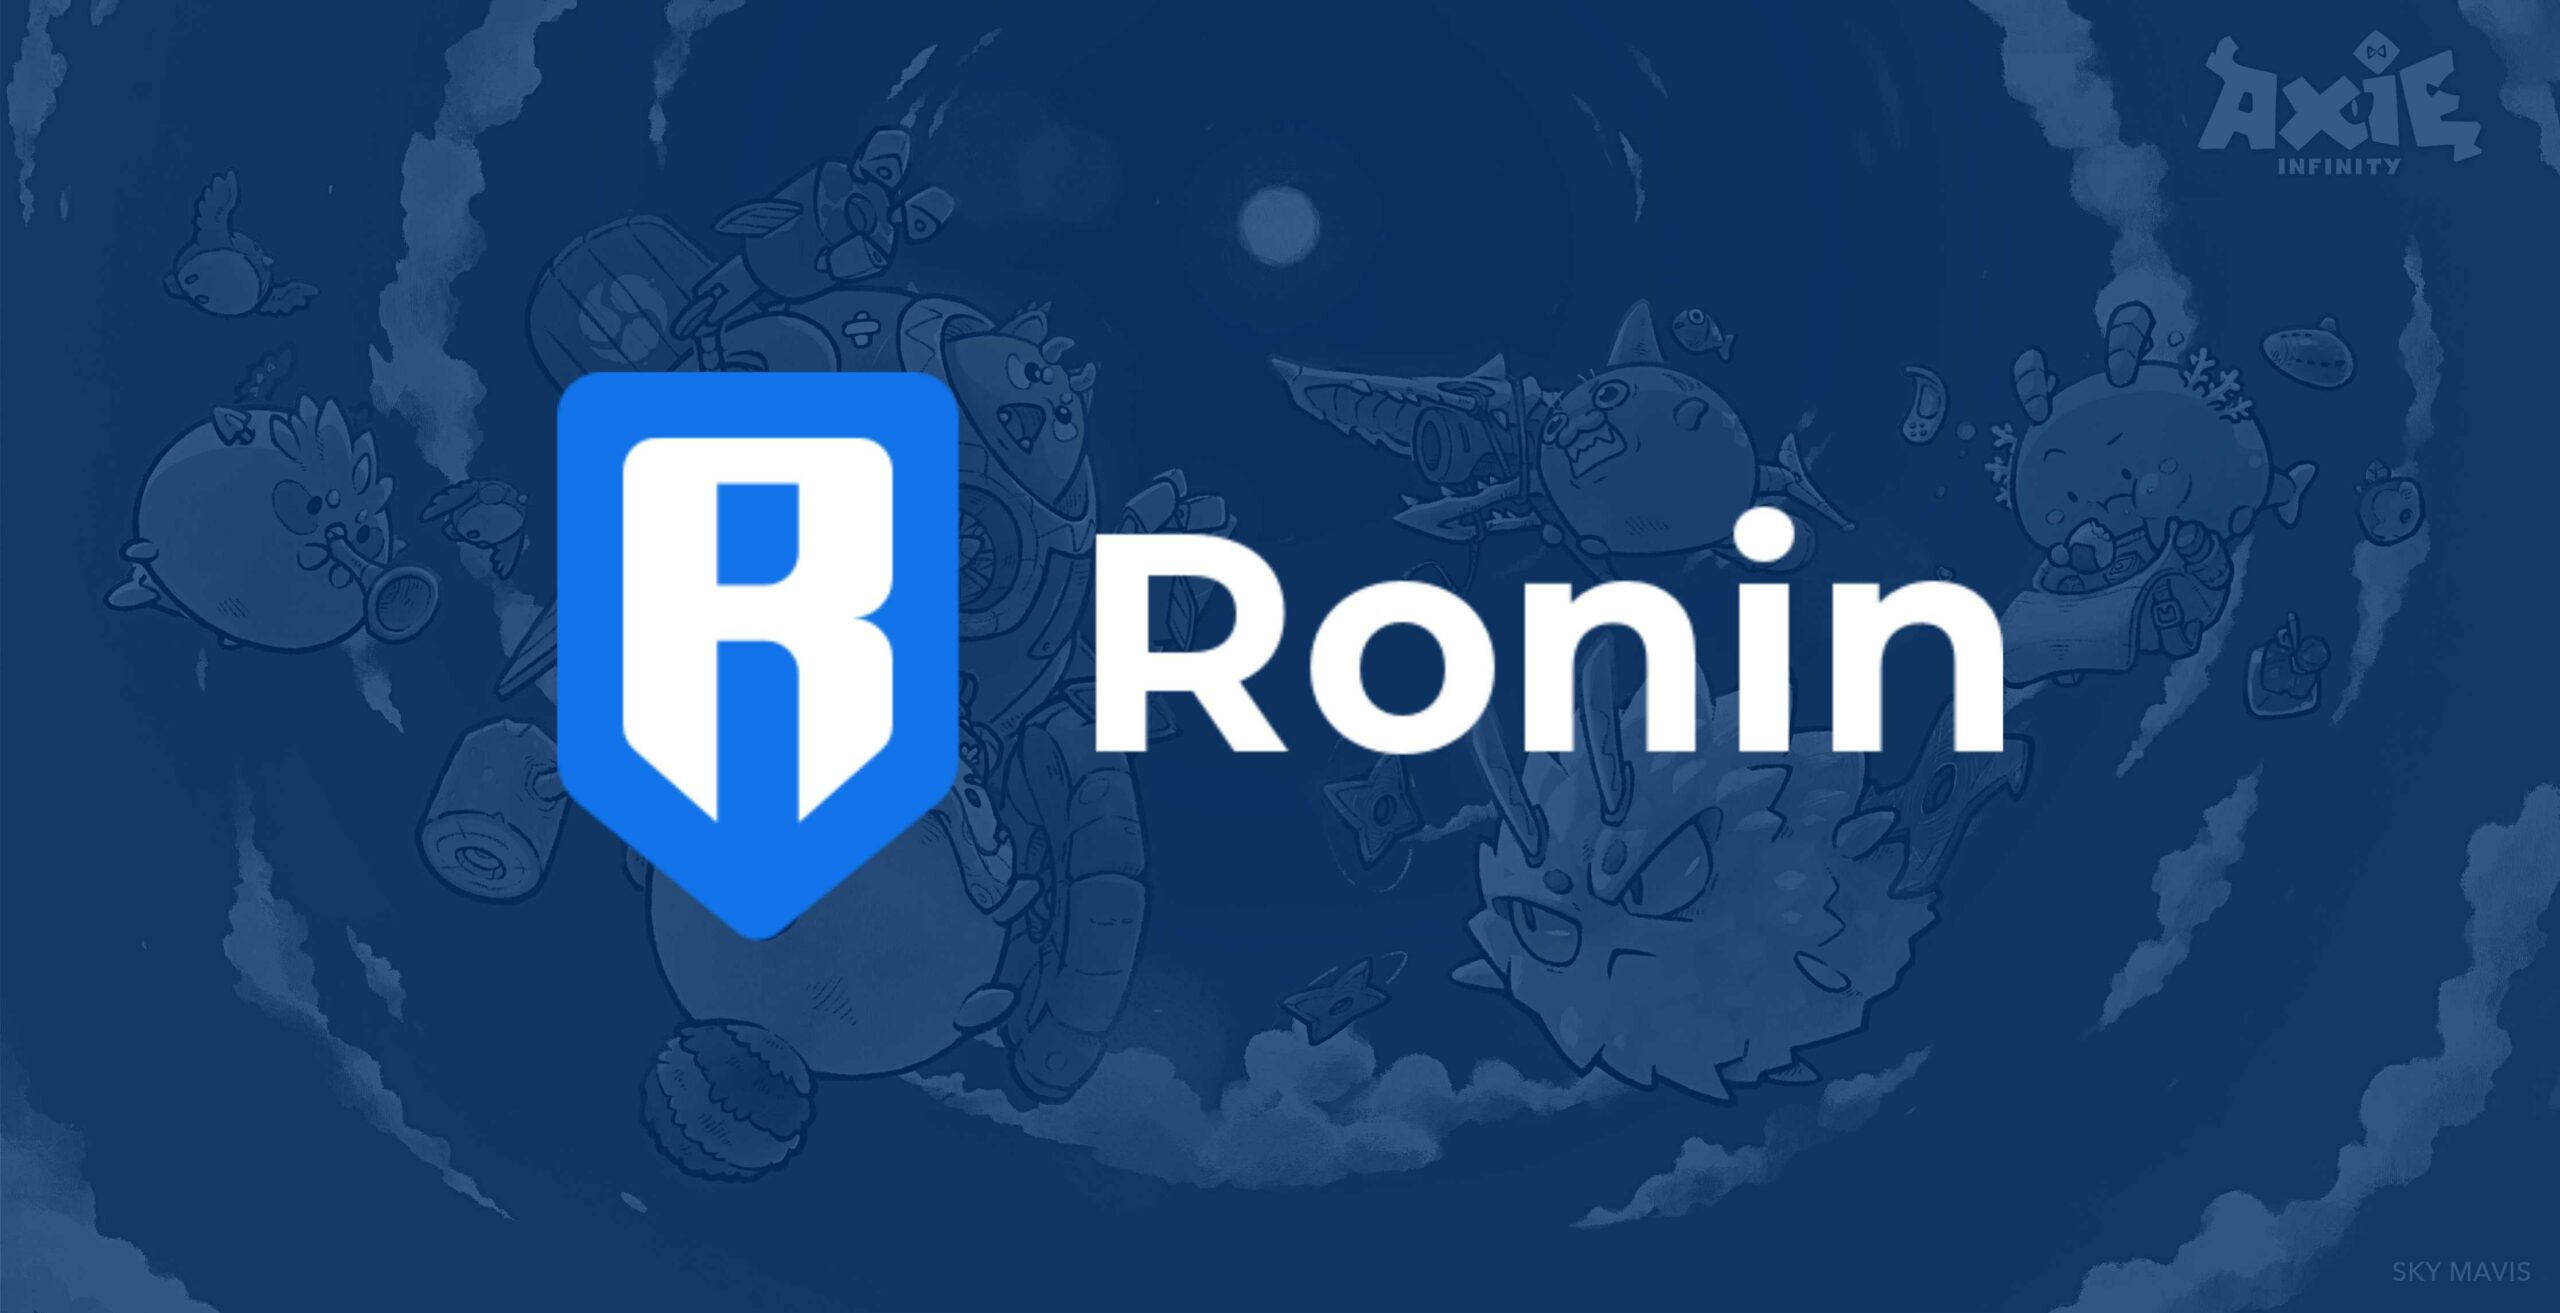 https://nftgames.net/wp-content/uploads/2022/04/Ronin-Networks-625M-breach-could-be-ranked-as-the-biggest-attack-on-DeFi.jpeg